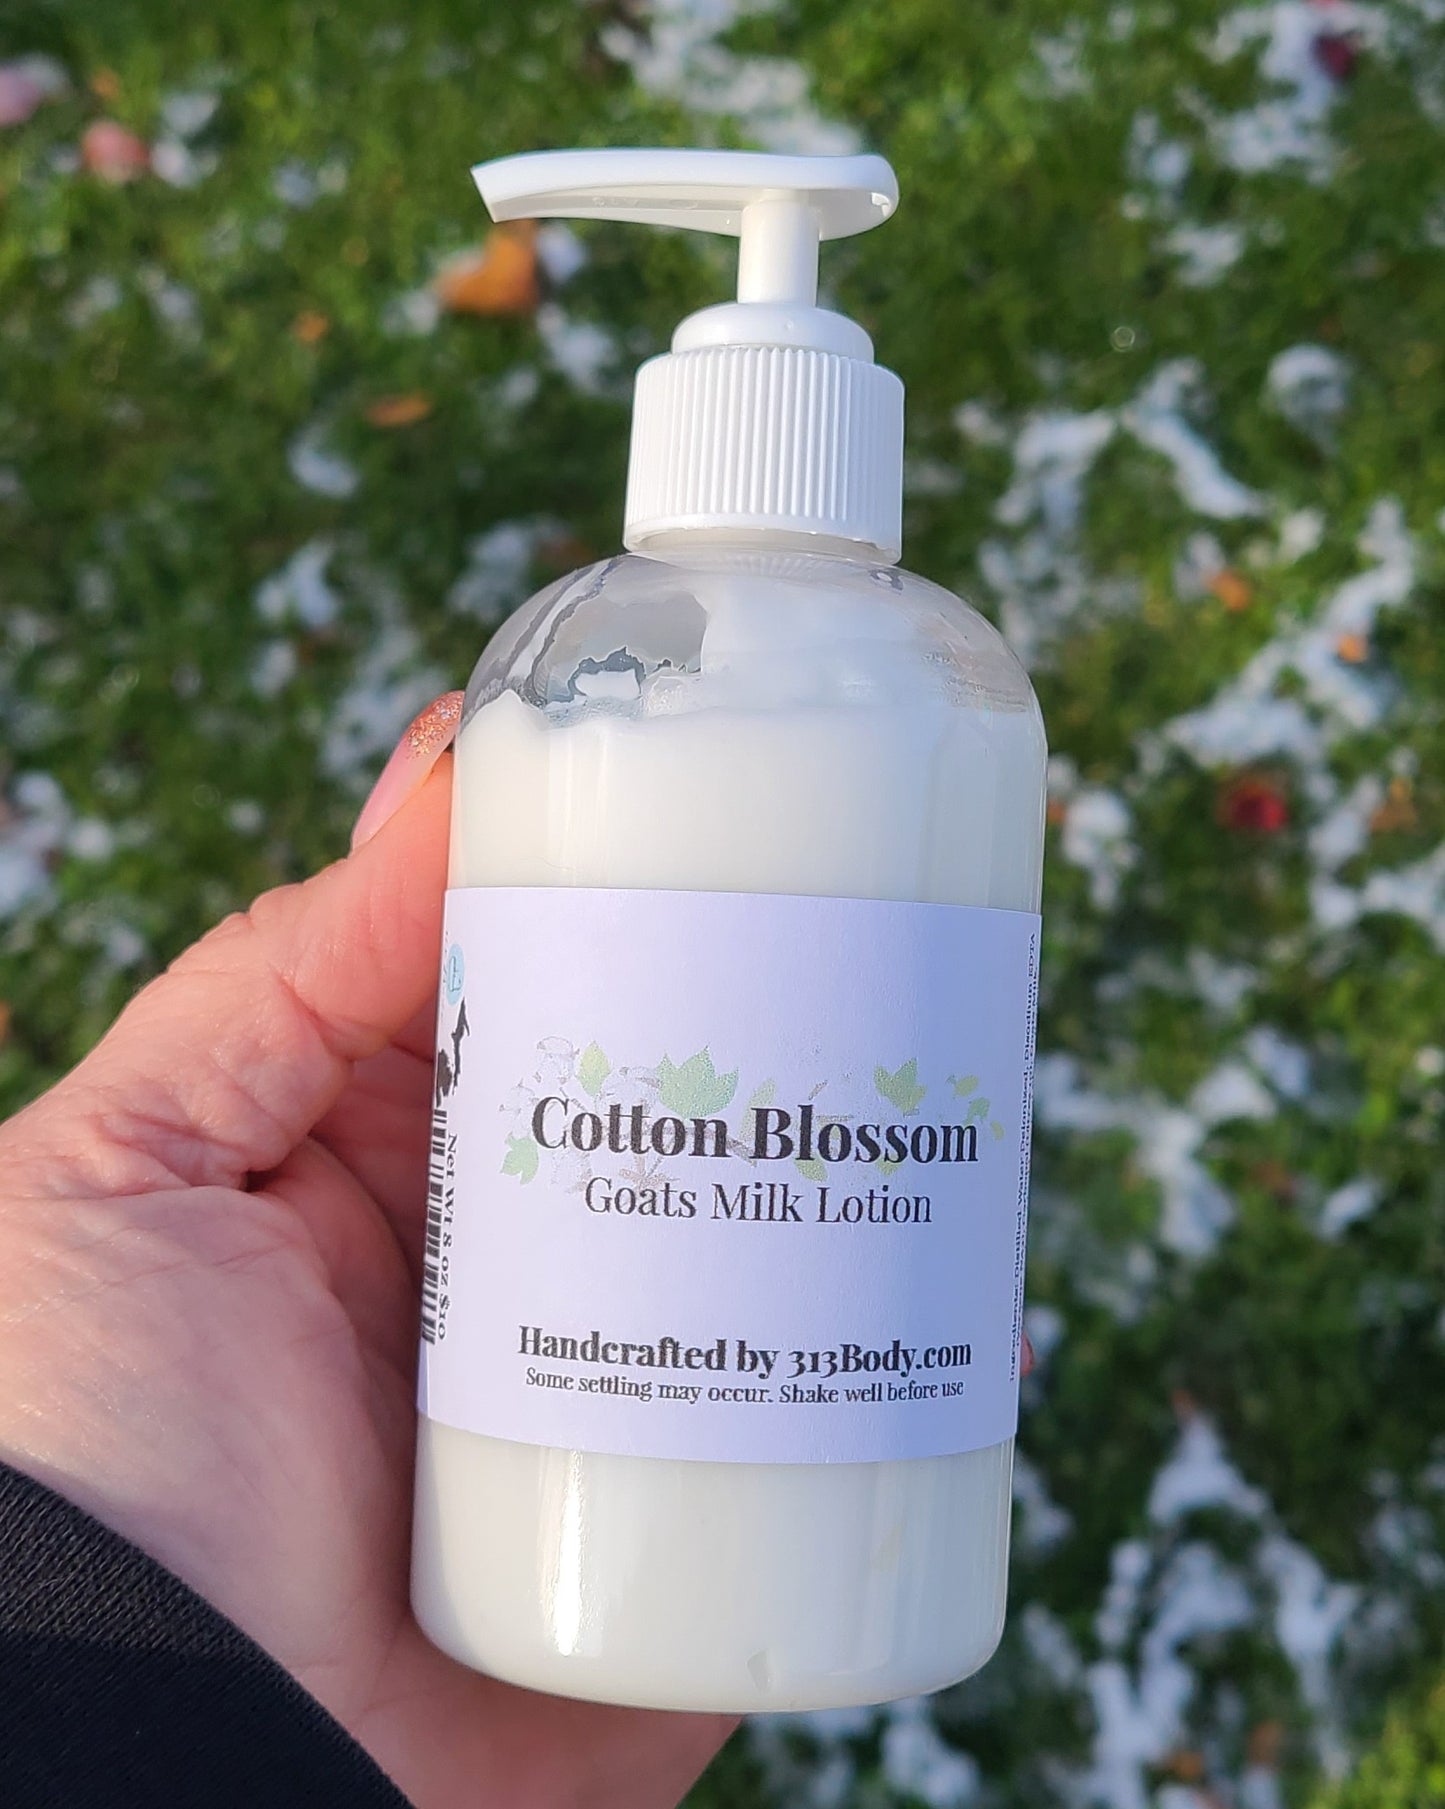 Goats Milk Body Lotion with Jojoba Oil - Cotton Blossom (inspired)